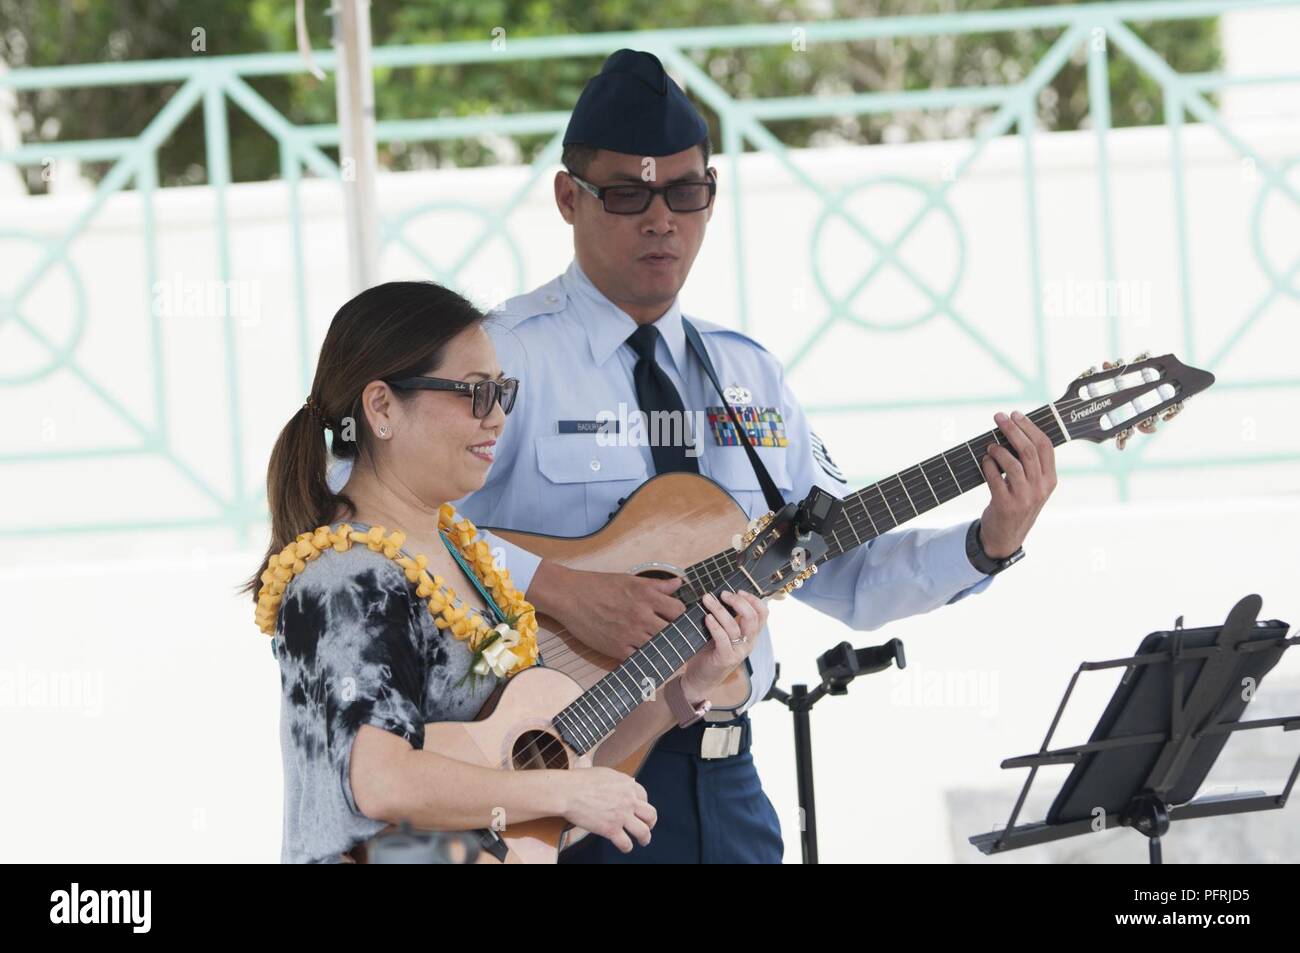 KANEOHE — Tech. Sgt. Daniel Baduria and his spouse, Nelly, perform “I’ll Remember You” during the 2018 Governor’s Memorial Day Ceremony at Hawaii State Veterans Cemetery, May 28, 2018. Stock Photo